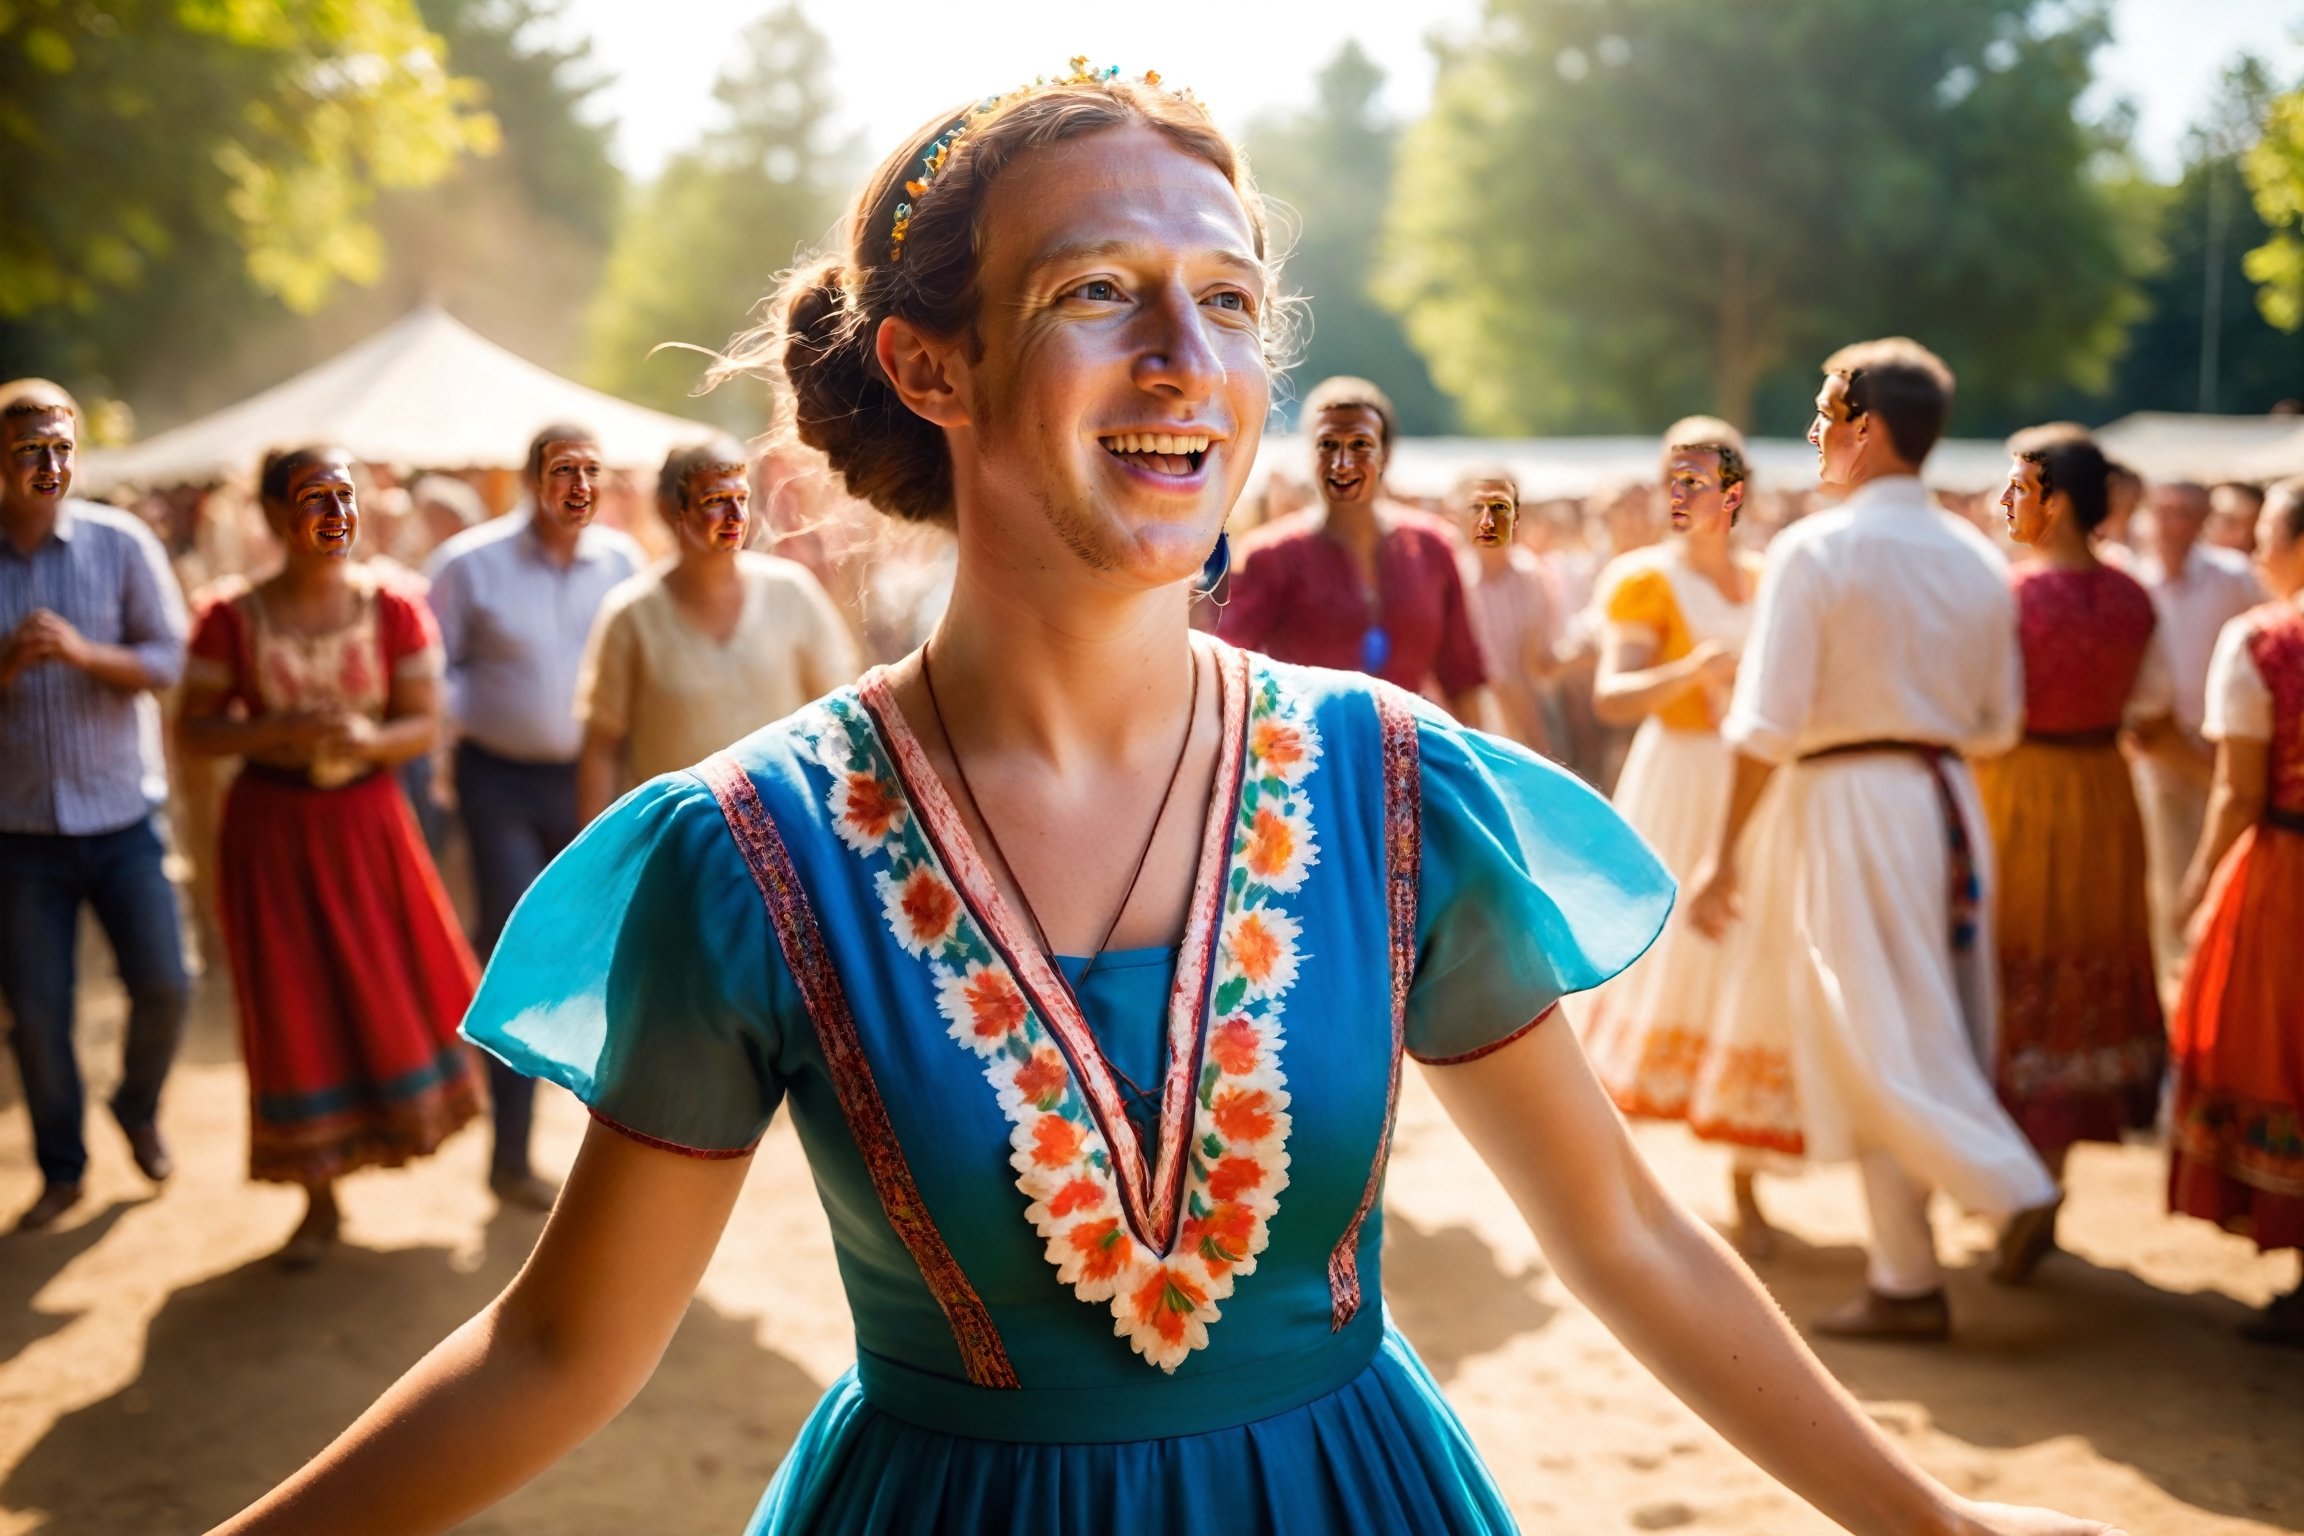 A photograph of a 25-year-old ((Mark Zuckerberg)) with a warm, joyful face full of freckles and big blue eyes that are looking directly at the viewer. She is captured in mid-dance, wearing a traditional folklore dress during a village festival on a sunny day. The image is taken from the point of view of a man dancing with her, giving the impression that the viewer is her dance partner. Sun rays are filtering through the scene, created with ray tracing to give a lifelike effect of sunlight. The environment is festive and colorful, with the background slightly blurred to focus on her expressive face and the details of her dress. The lighting is natural and bright, enhancing the cheerful atmosphere.,360 View